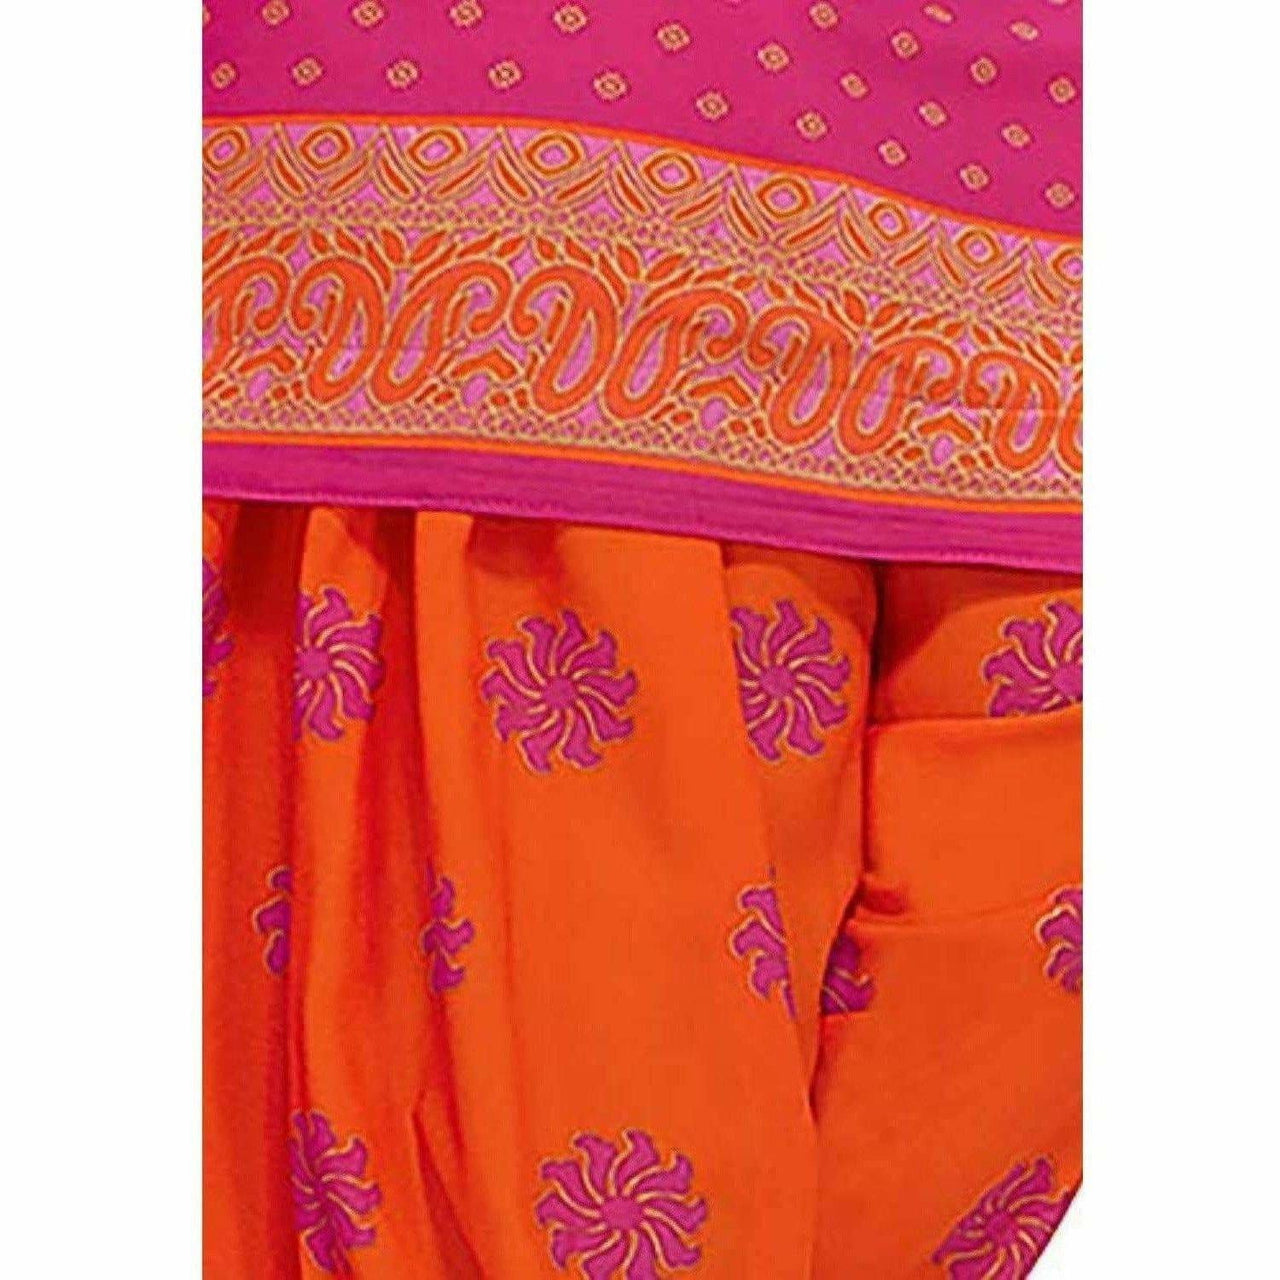 Synthetic Pink & Orange Printed Unstitched Salwar Suits Dress Material with Dupatta - Distacart